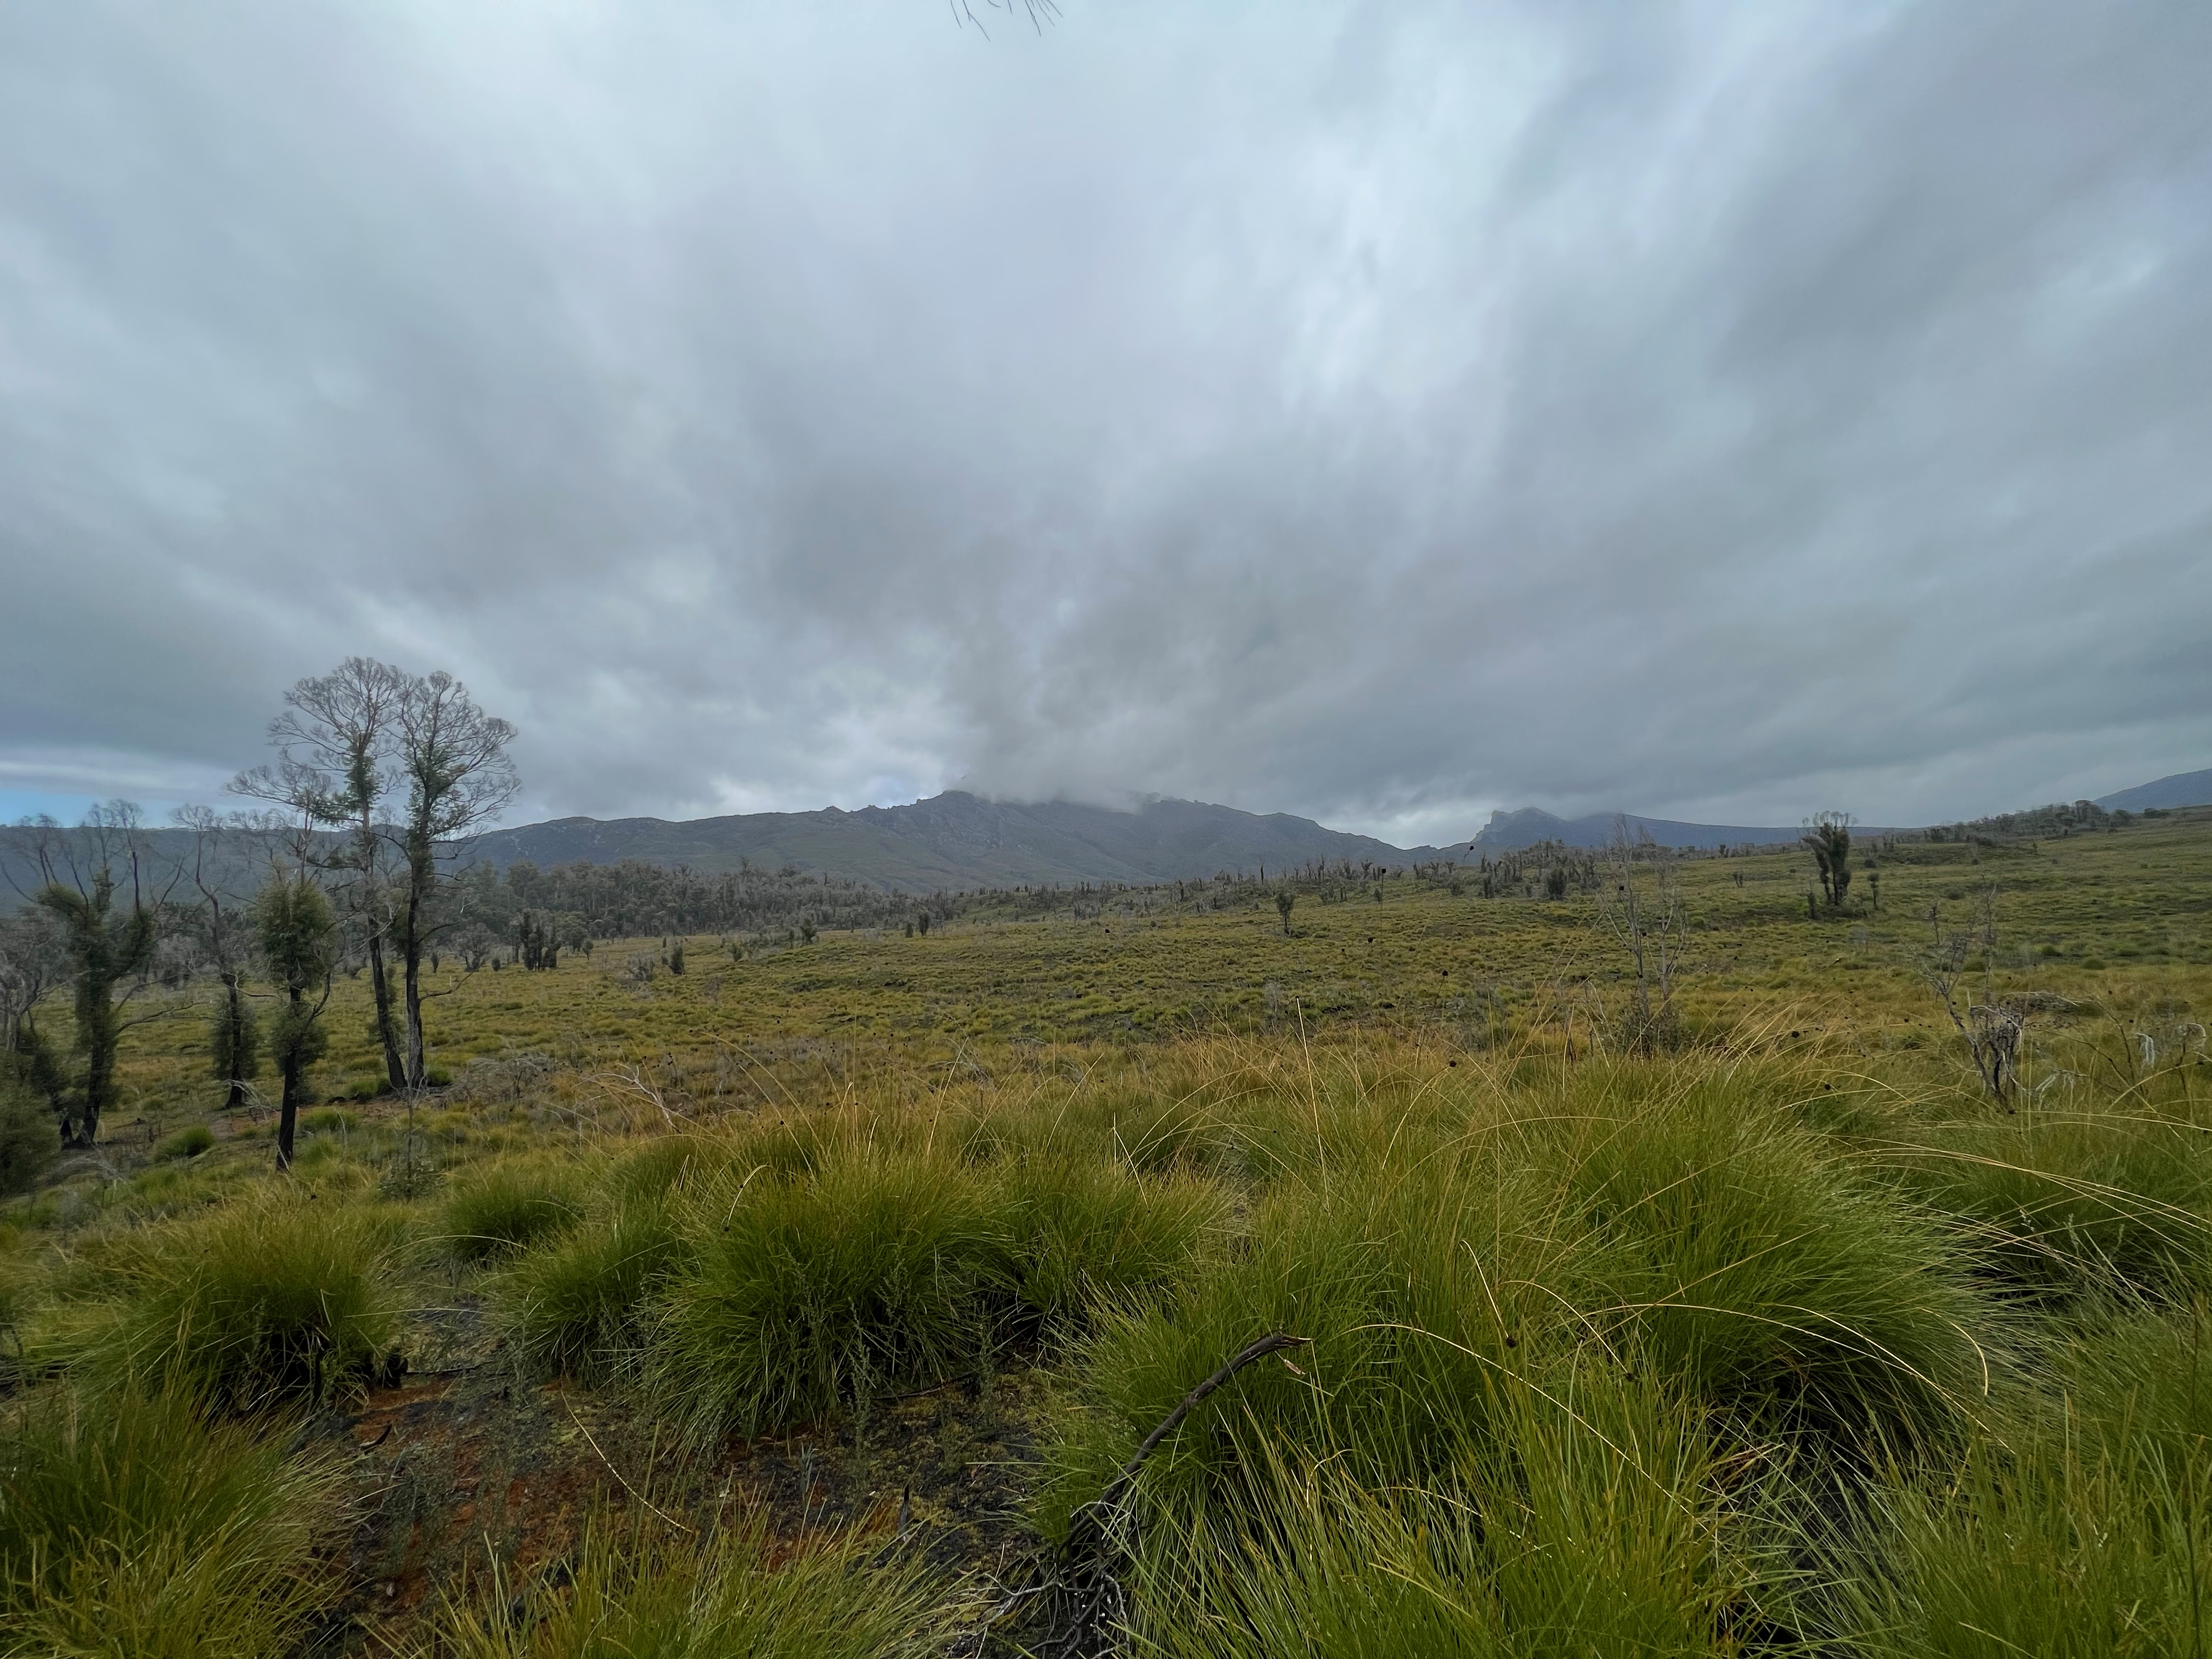 Grassy plains with a mountain in the background, covered with cloud